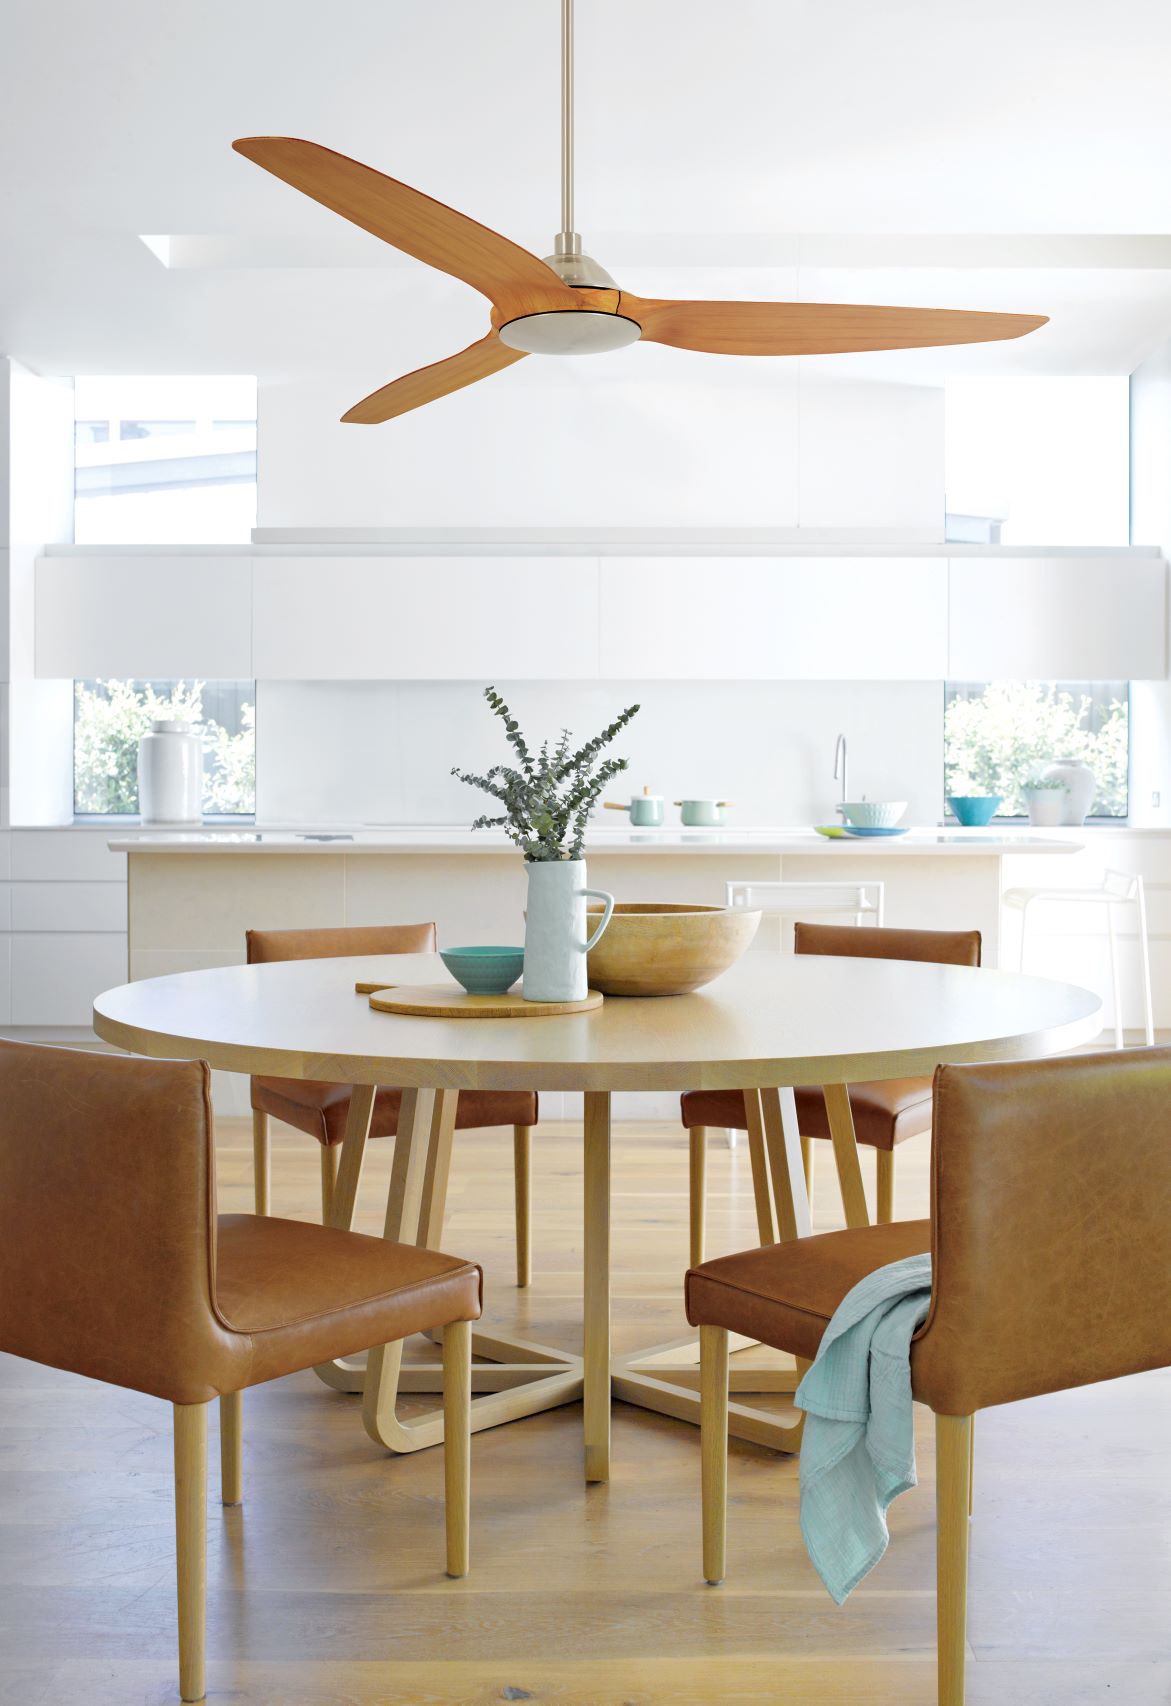 How to choose ceiling fans